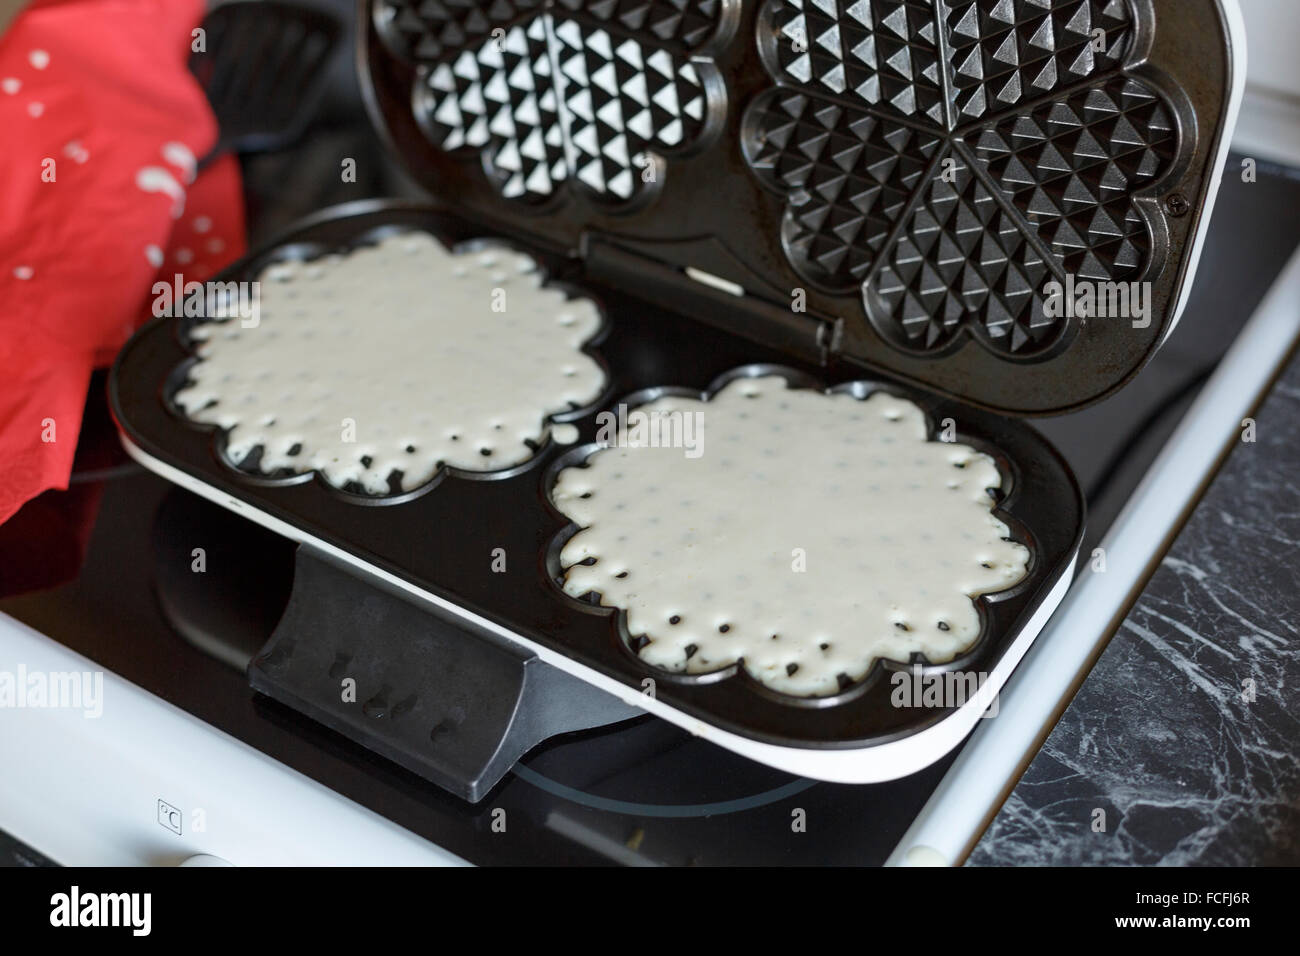 Two homemade waffles on electric waffle maker iron on top of stove in kitchen Stock Photo